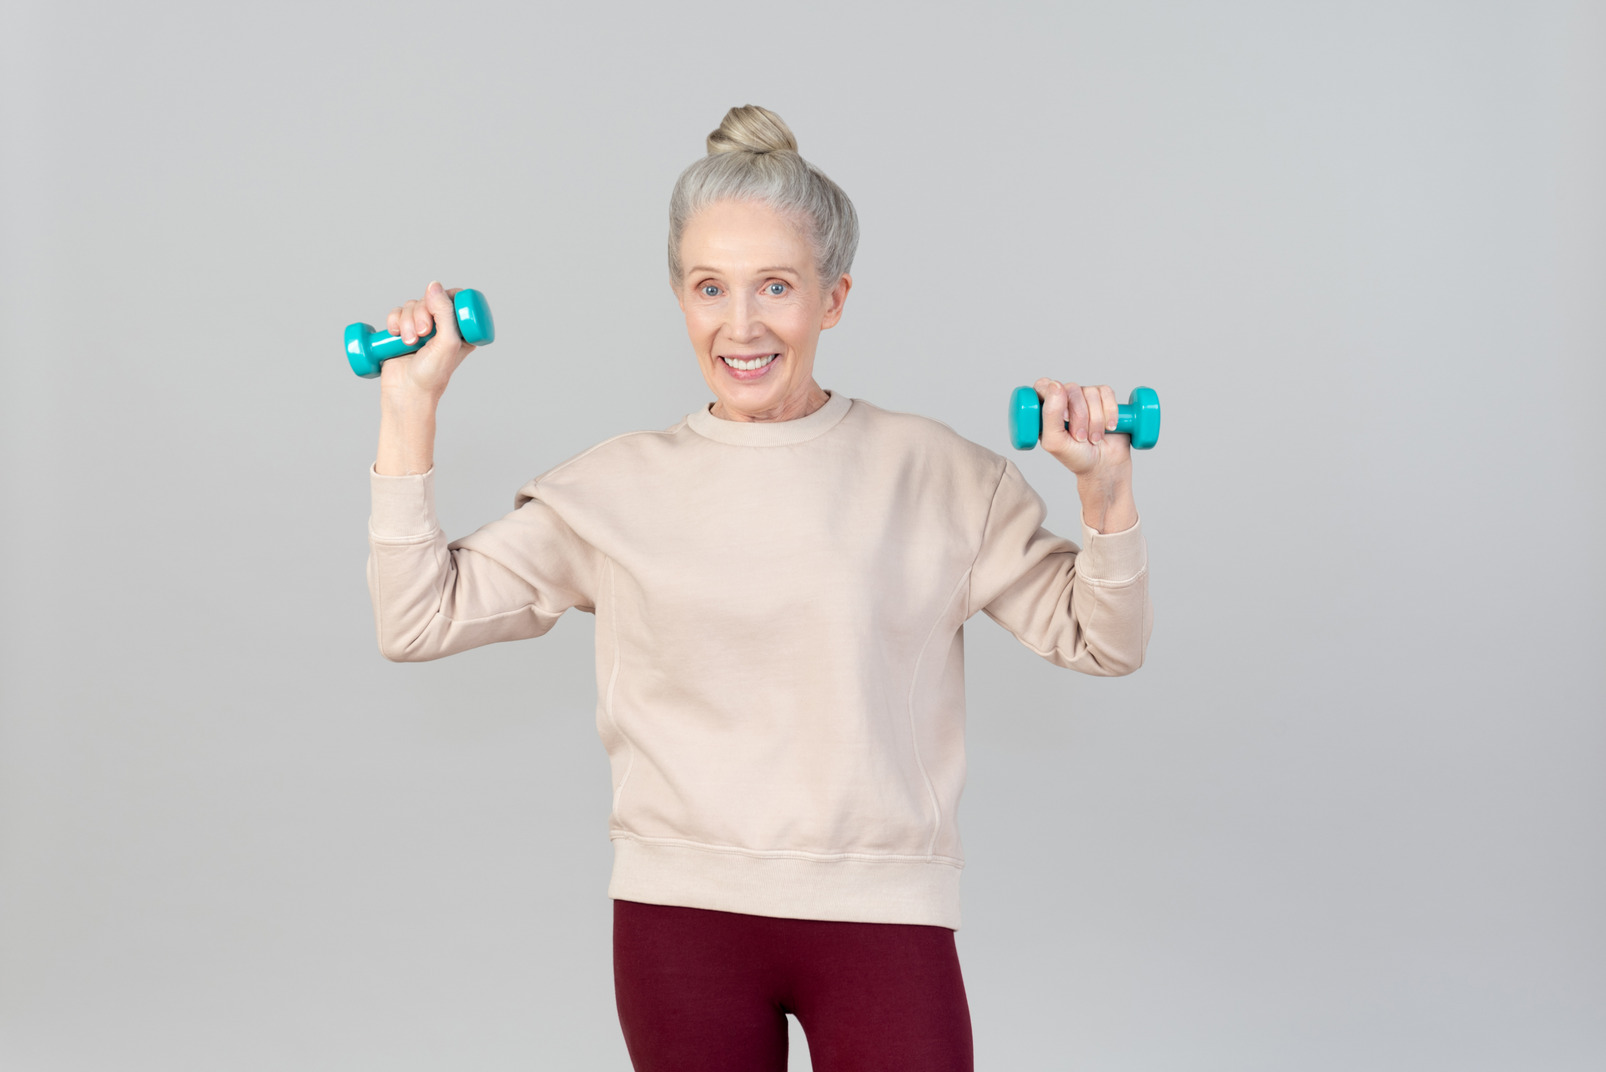 Old woman holding hand weights